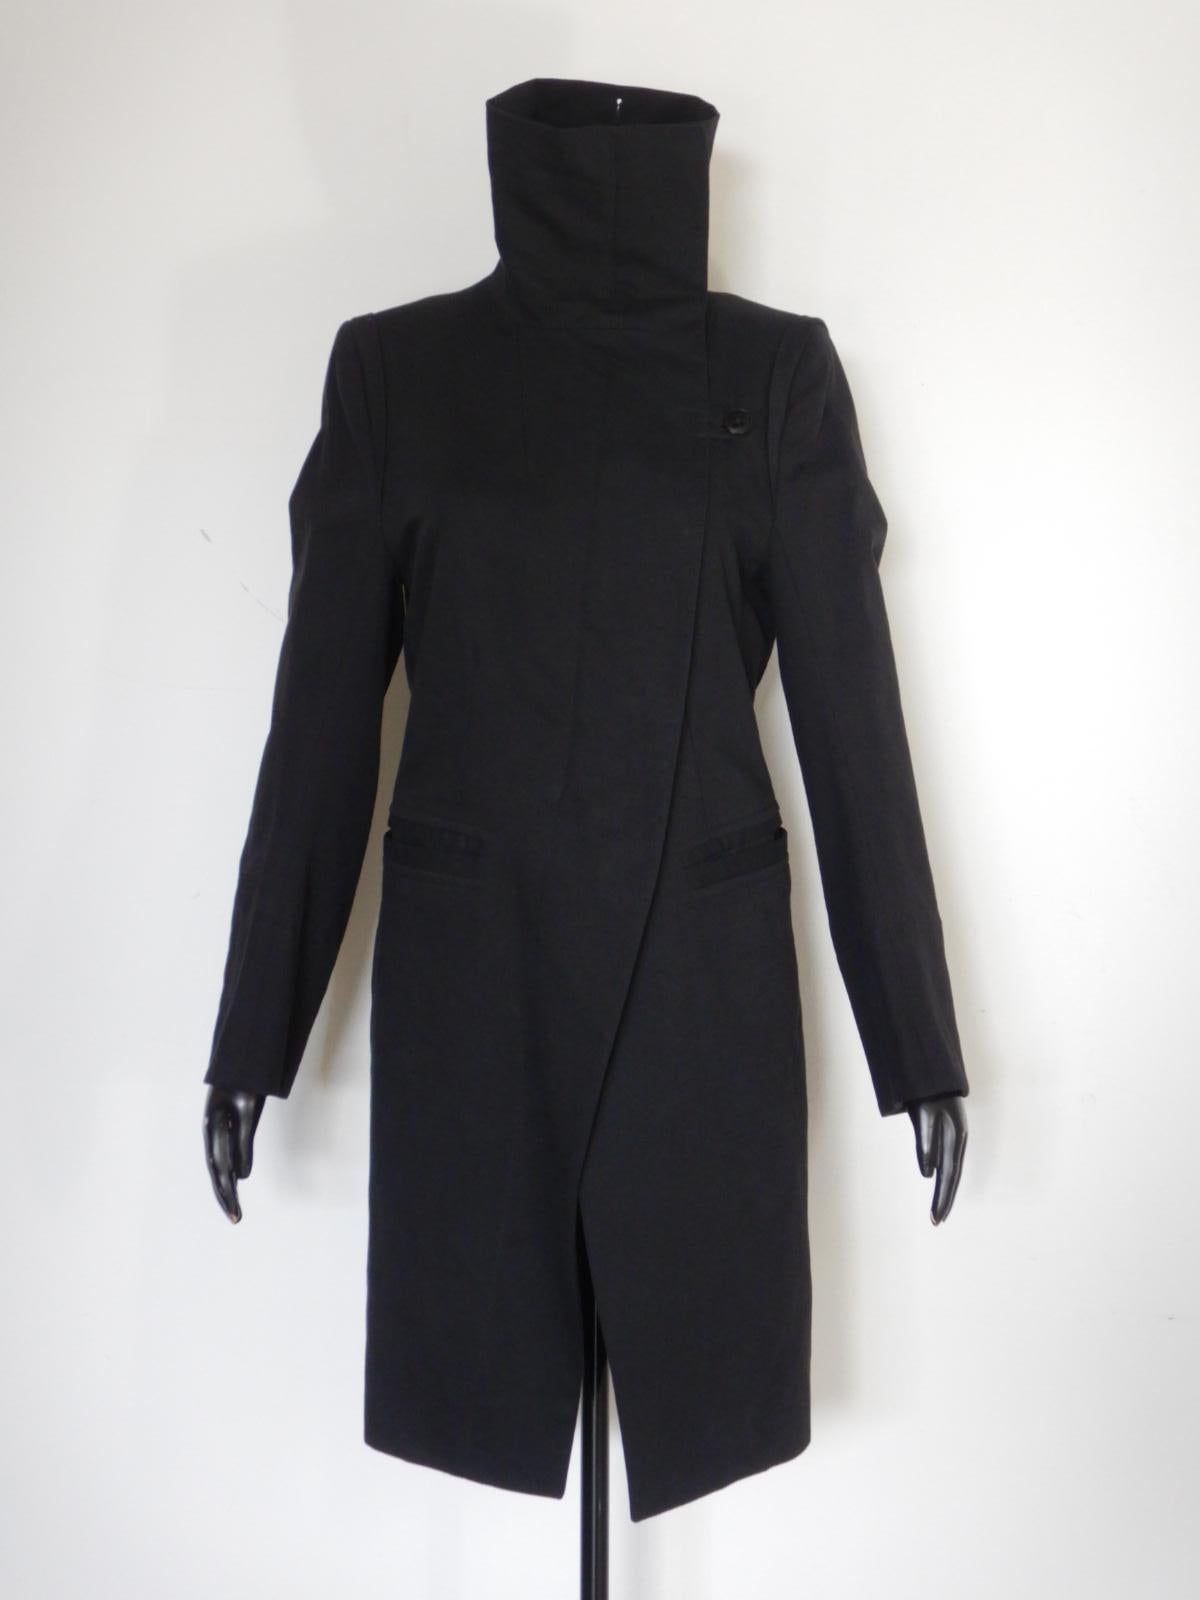 Ann Demeulemeester black zip-front coat.

The coat is composed of cotton (96%), and cashmere (4%).  

Tagged a size 42.  This is in good pre-owned condition with no issues. 

Jacket measurements: 
Shoulder: 16